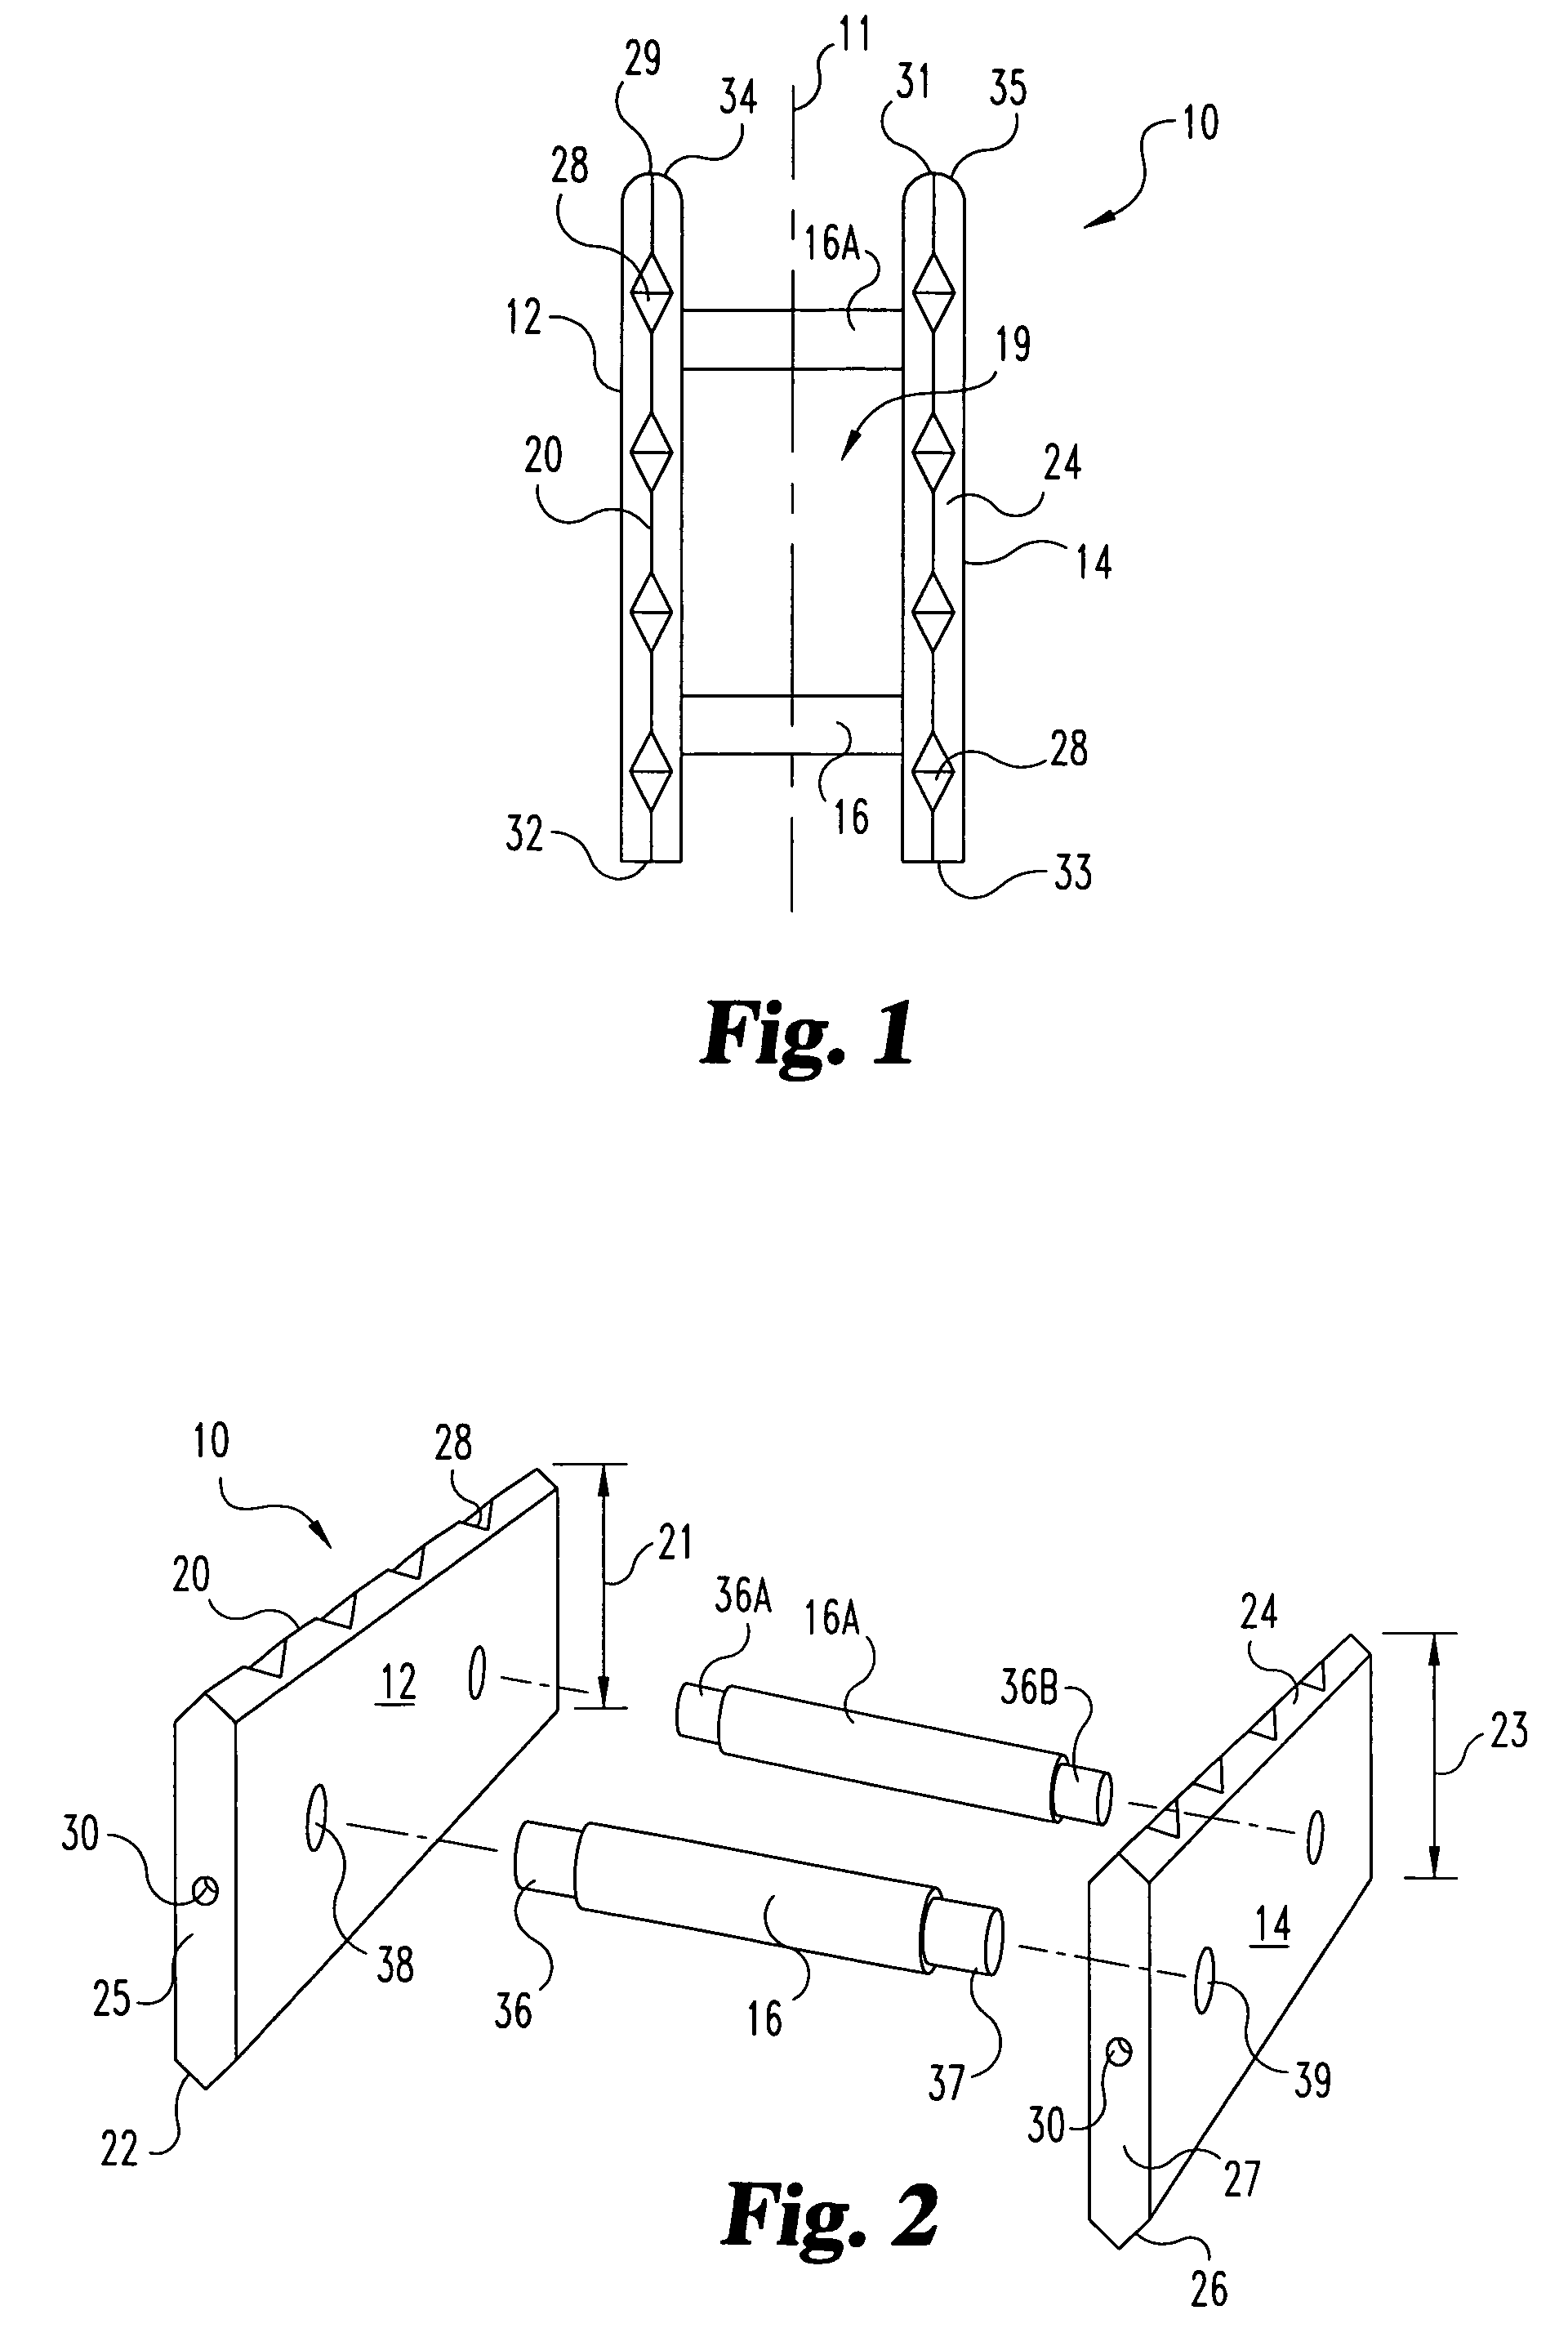 Reinforced molded implant formed of cortical bone